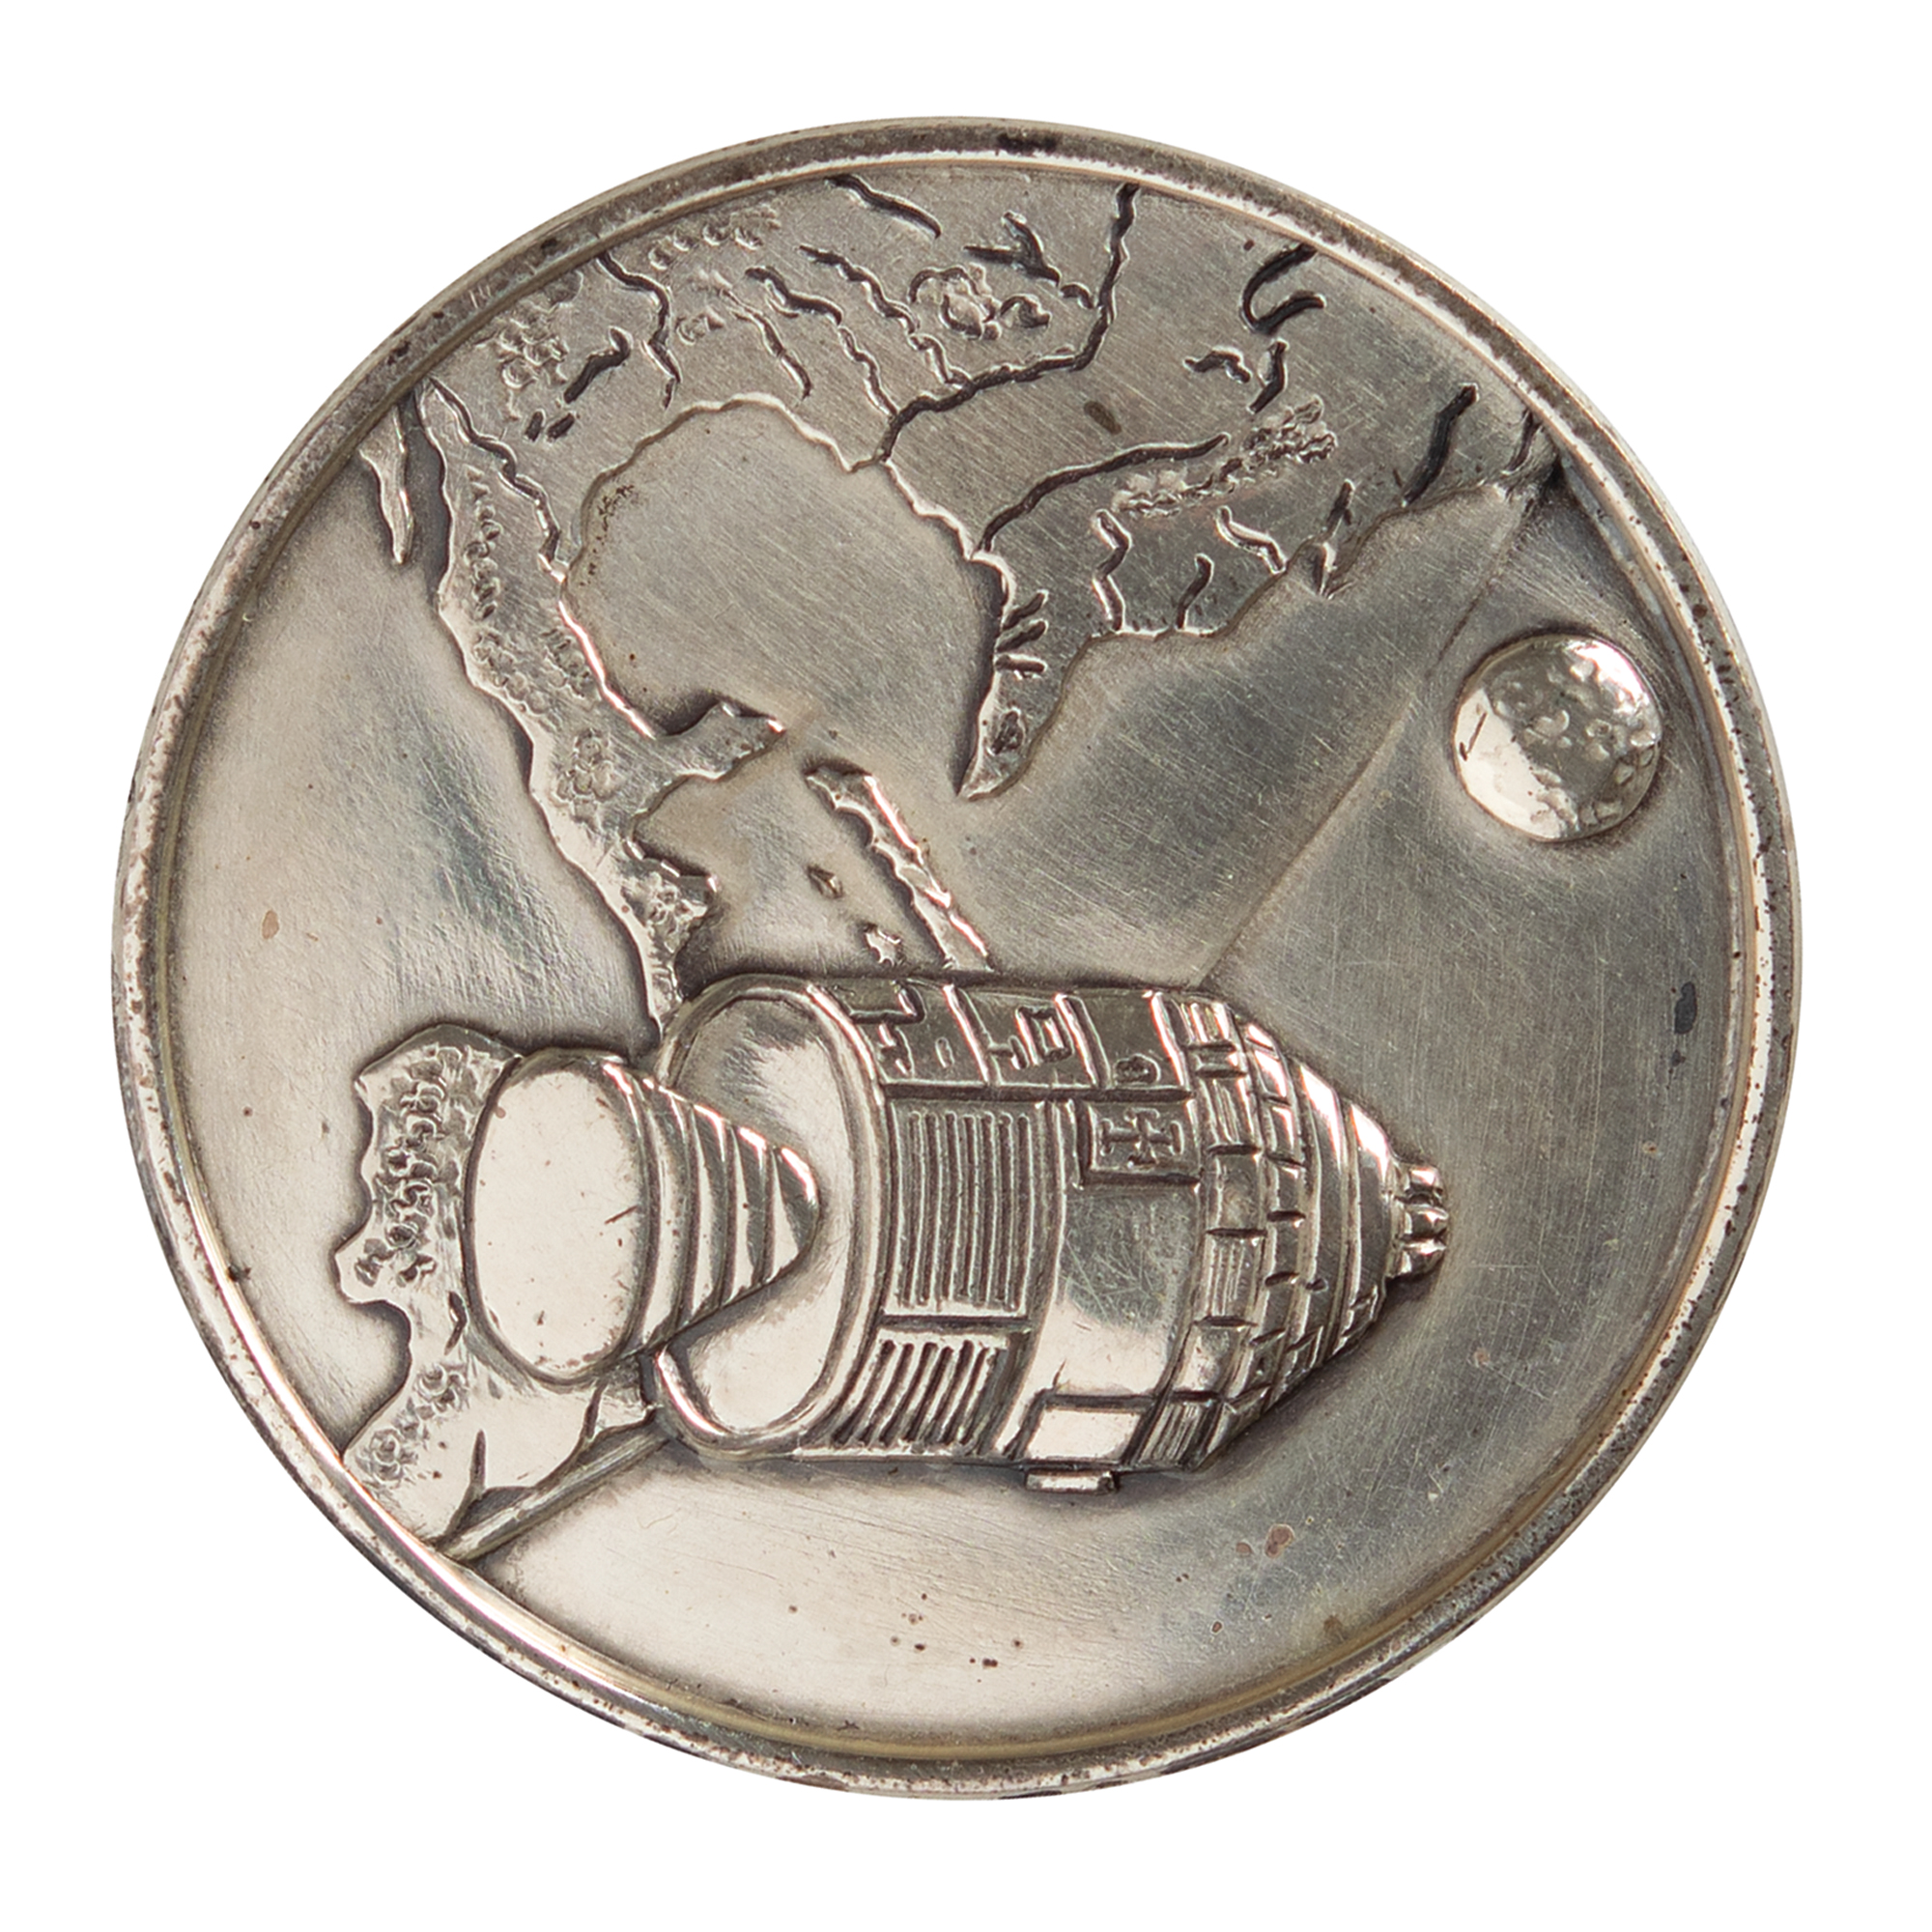 Lot #7217 Apollo 1 Silver Fliteline Medallion Attested as Flown on the Apollo 9 Mission - From the Family Collection of Ed White II